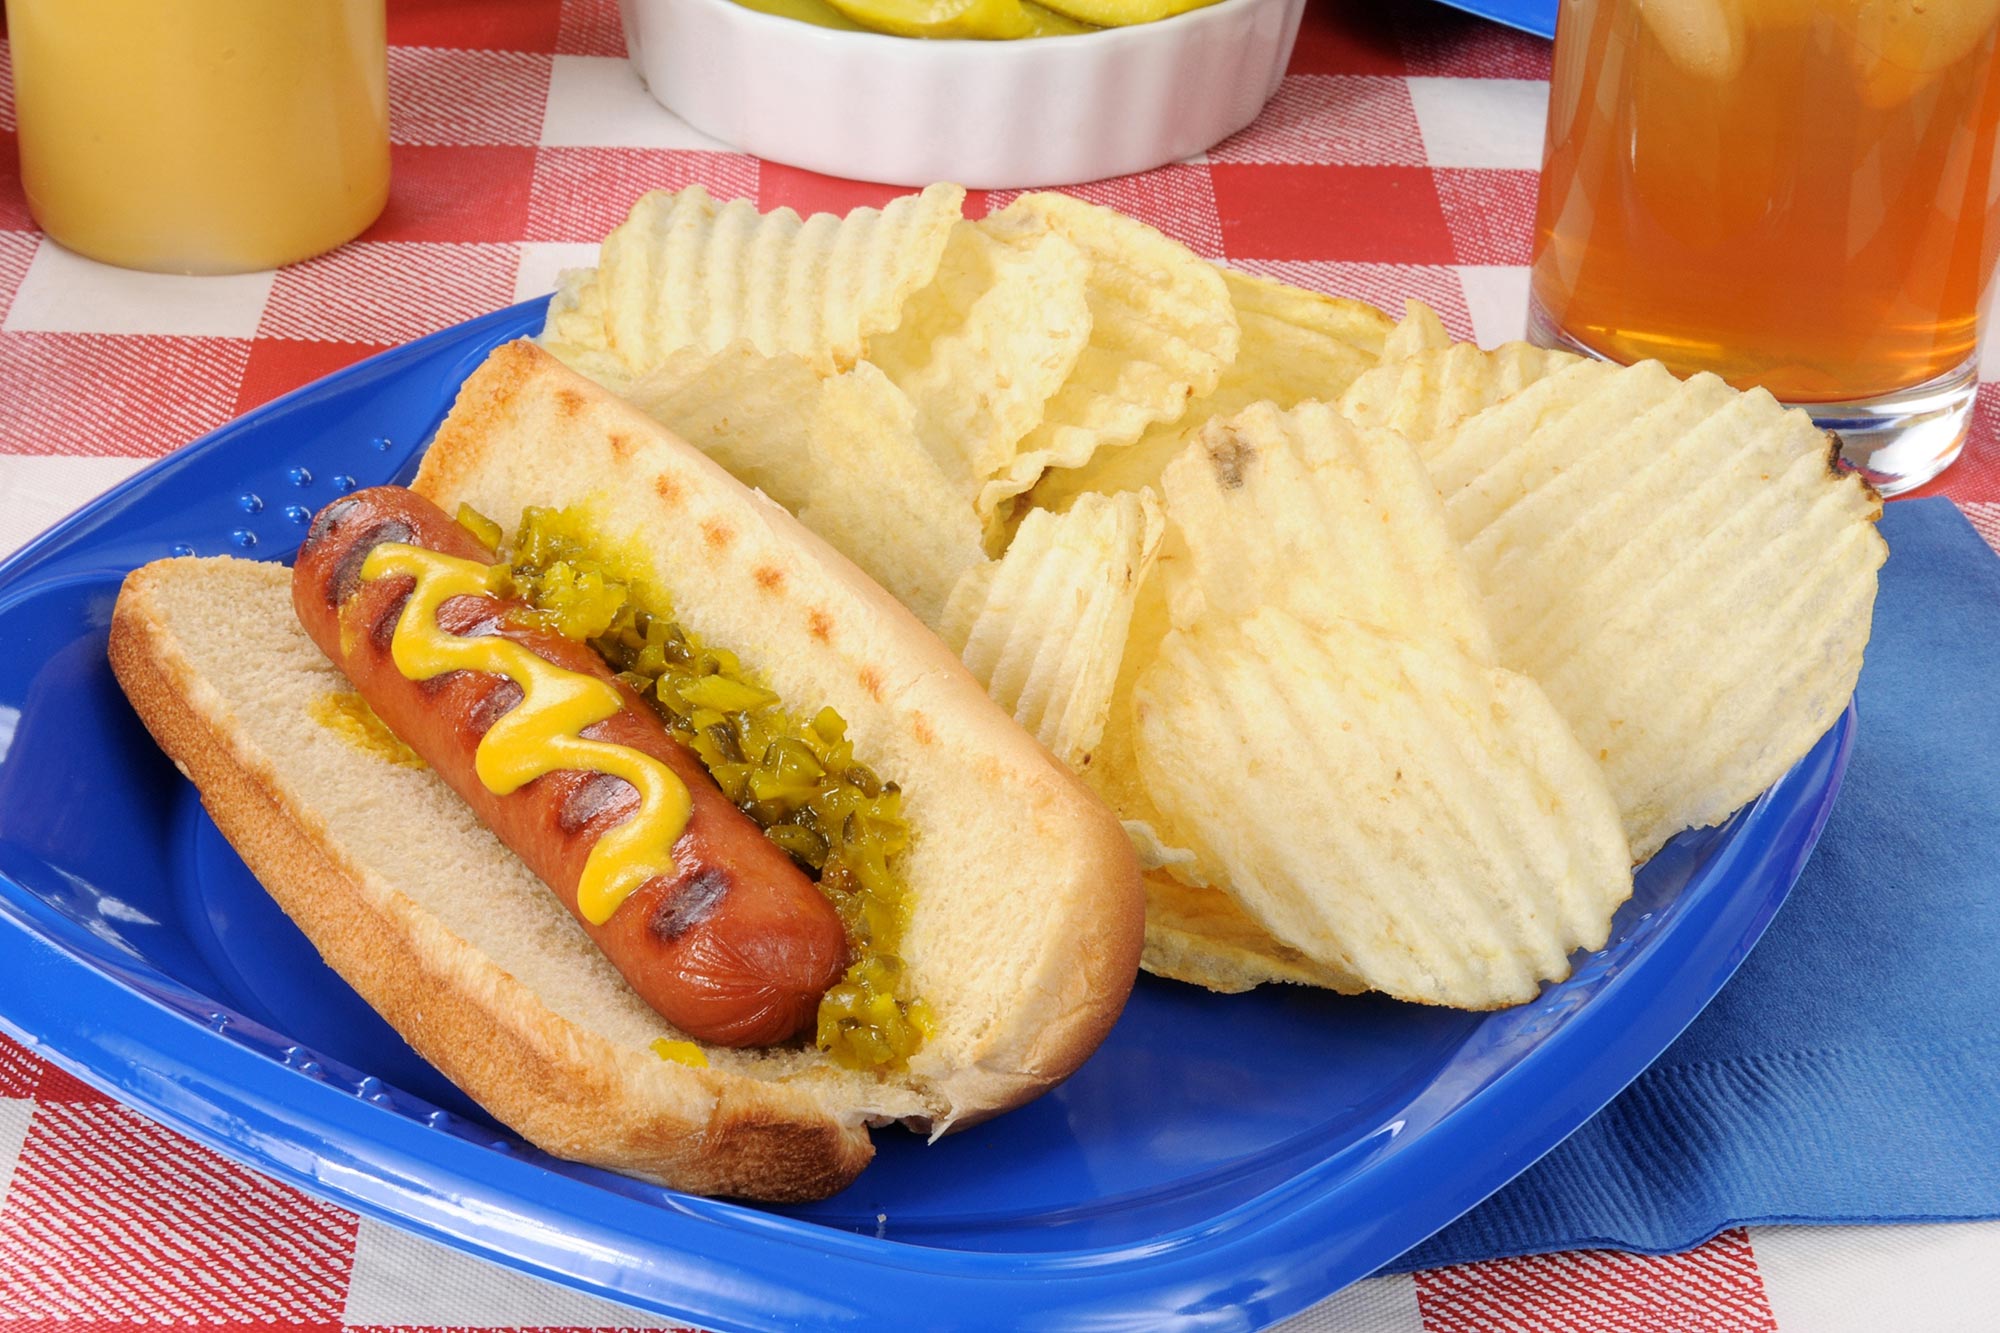 Hot Dog and Chips